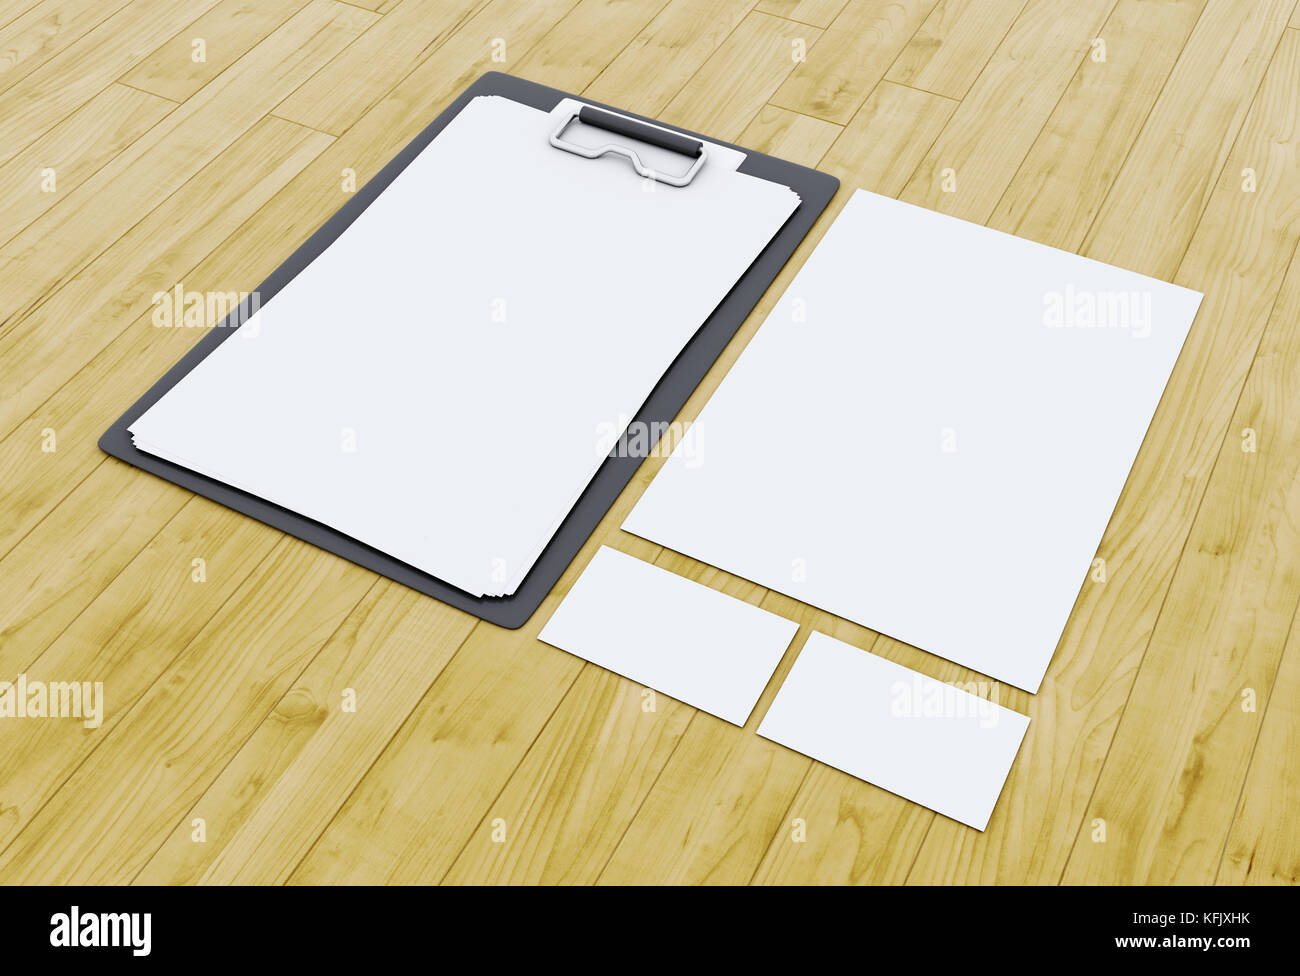 3d illustration. Business cards and blank notepads on wooden table. Mock-up for branding identity Stock Photo